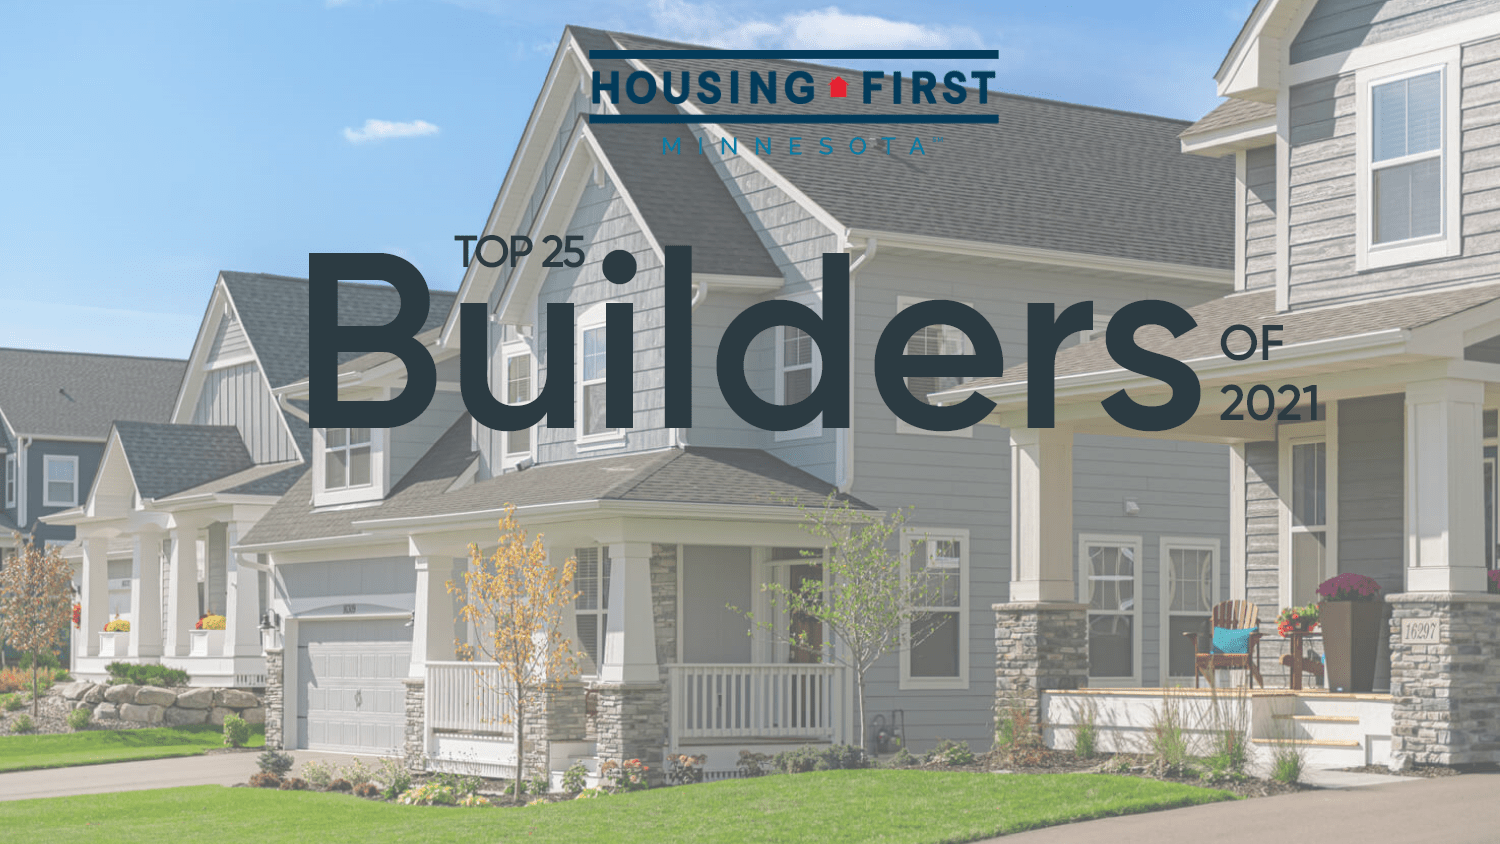 Housing First Minnesota Top 25 Builders of 2021 role="img"